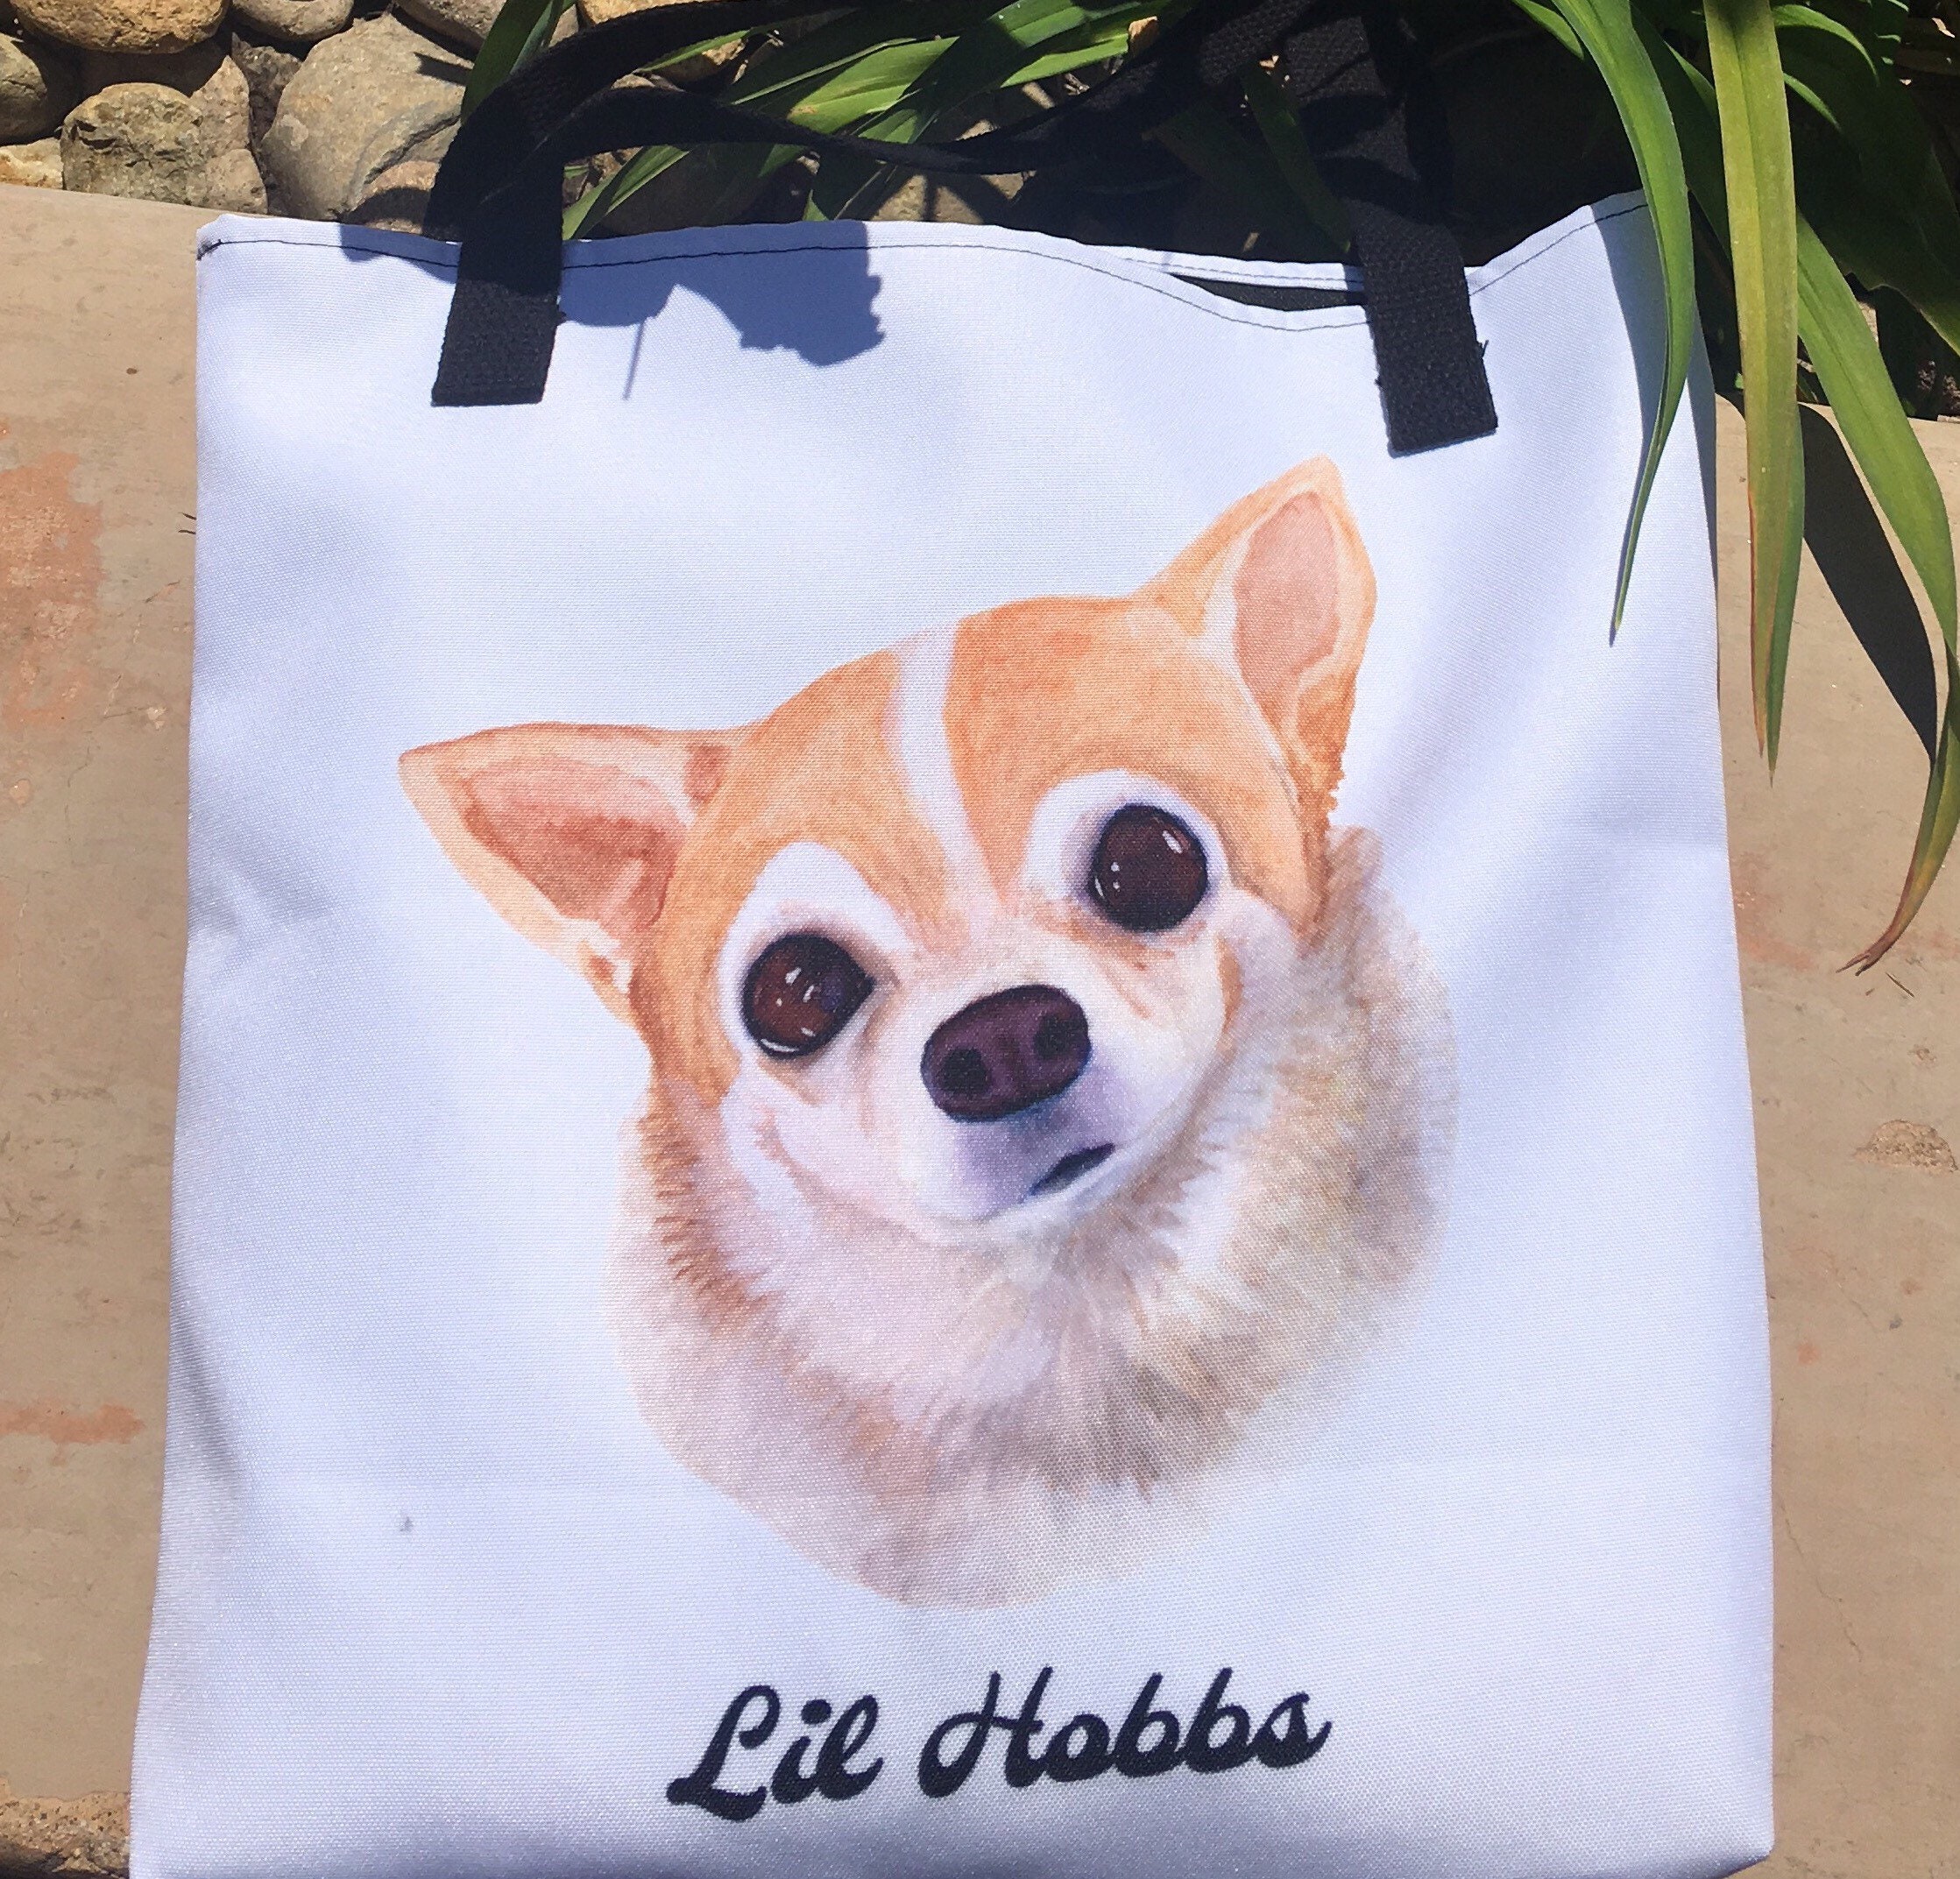  Tan And White Chihuahua Dog Face Tote Bag, 3D Chihuahua Dog  Face Shoulder Bag With Press Stud, Chihuahua Dog Printed Tote Bags For  Chihuahua Lovers Gift, Reusable Shopping Bags Travel Casual